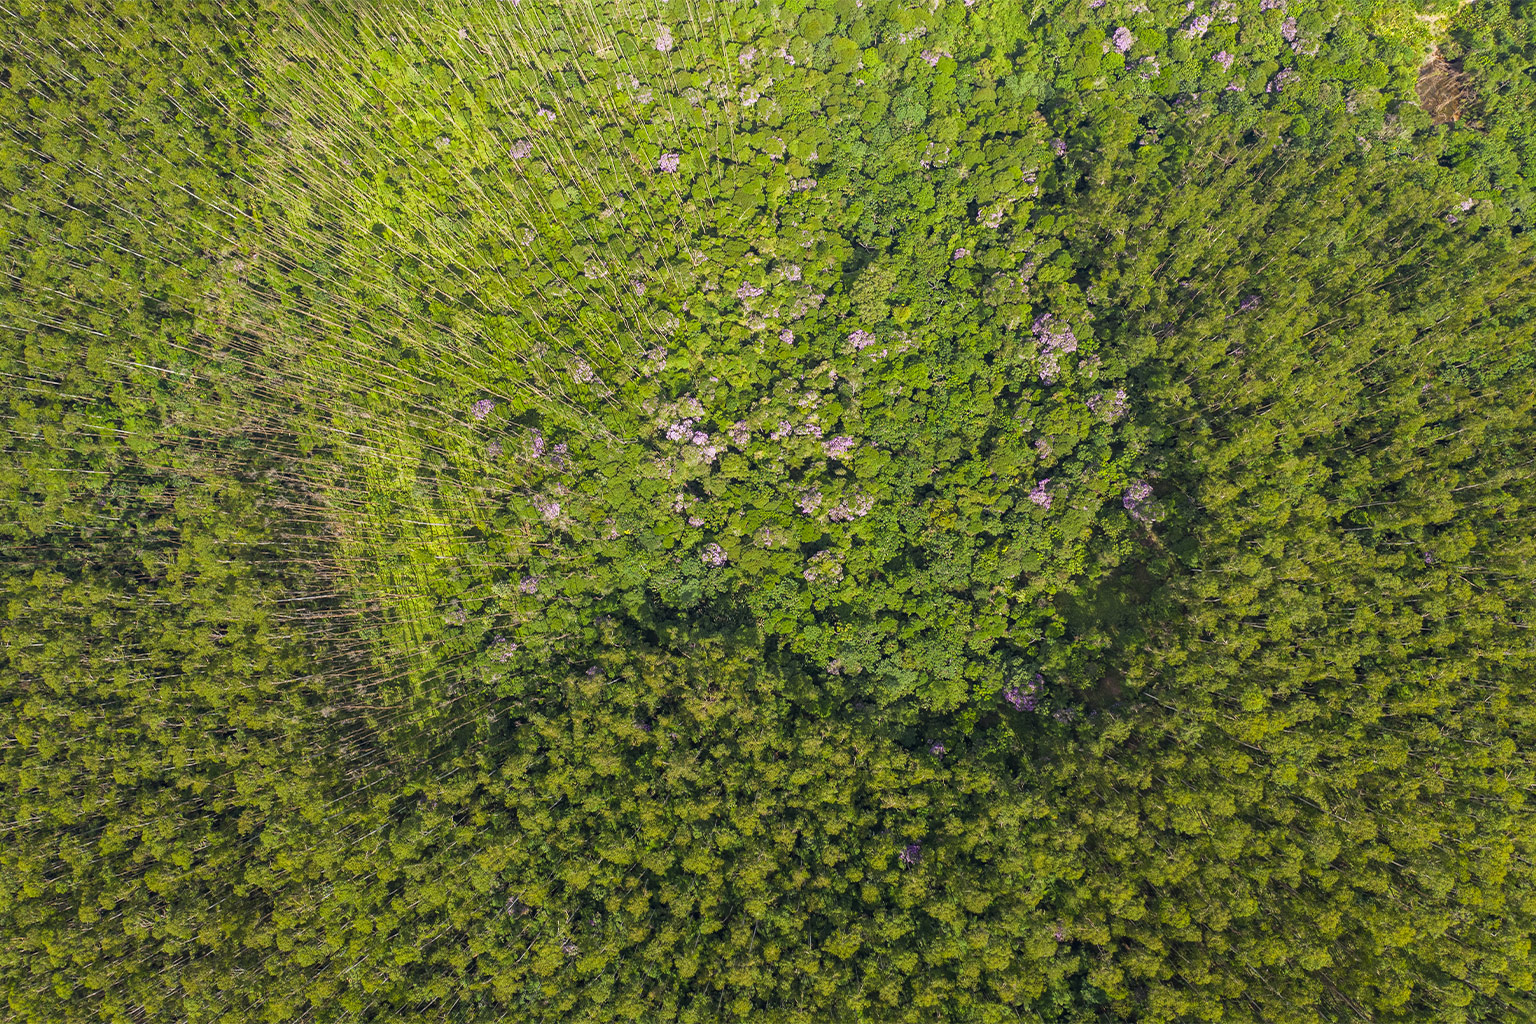 An aerial view of a restored landscape containing native forest regenerating in the understory of a eucalyptus plantation.